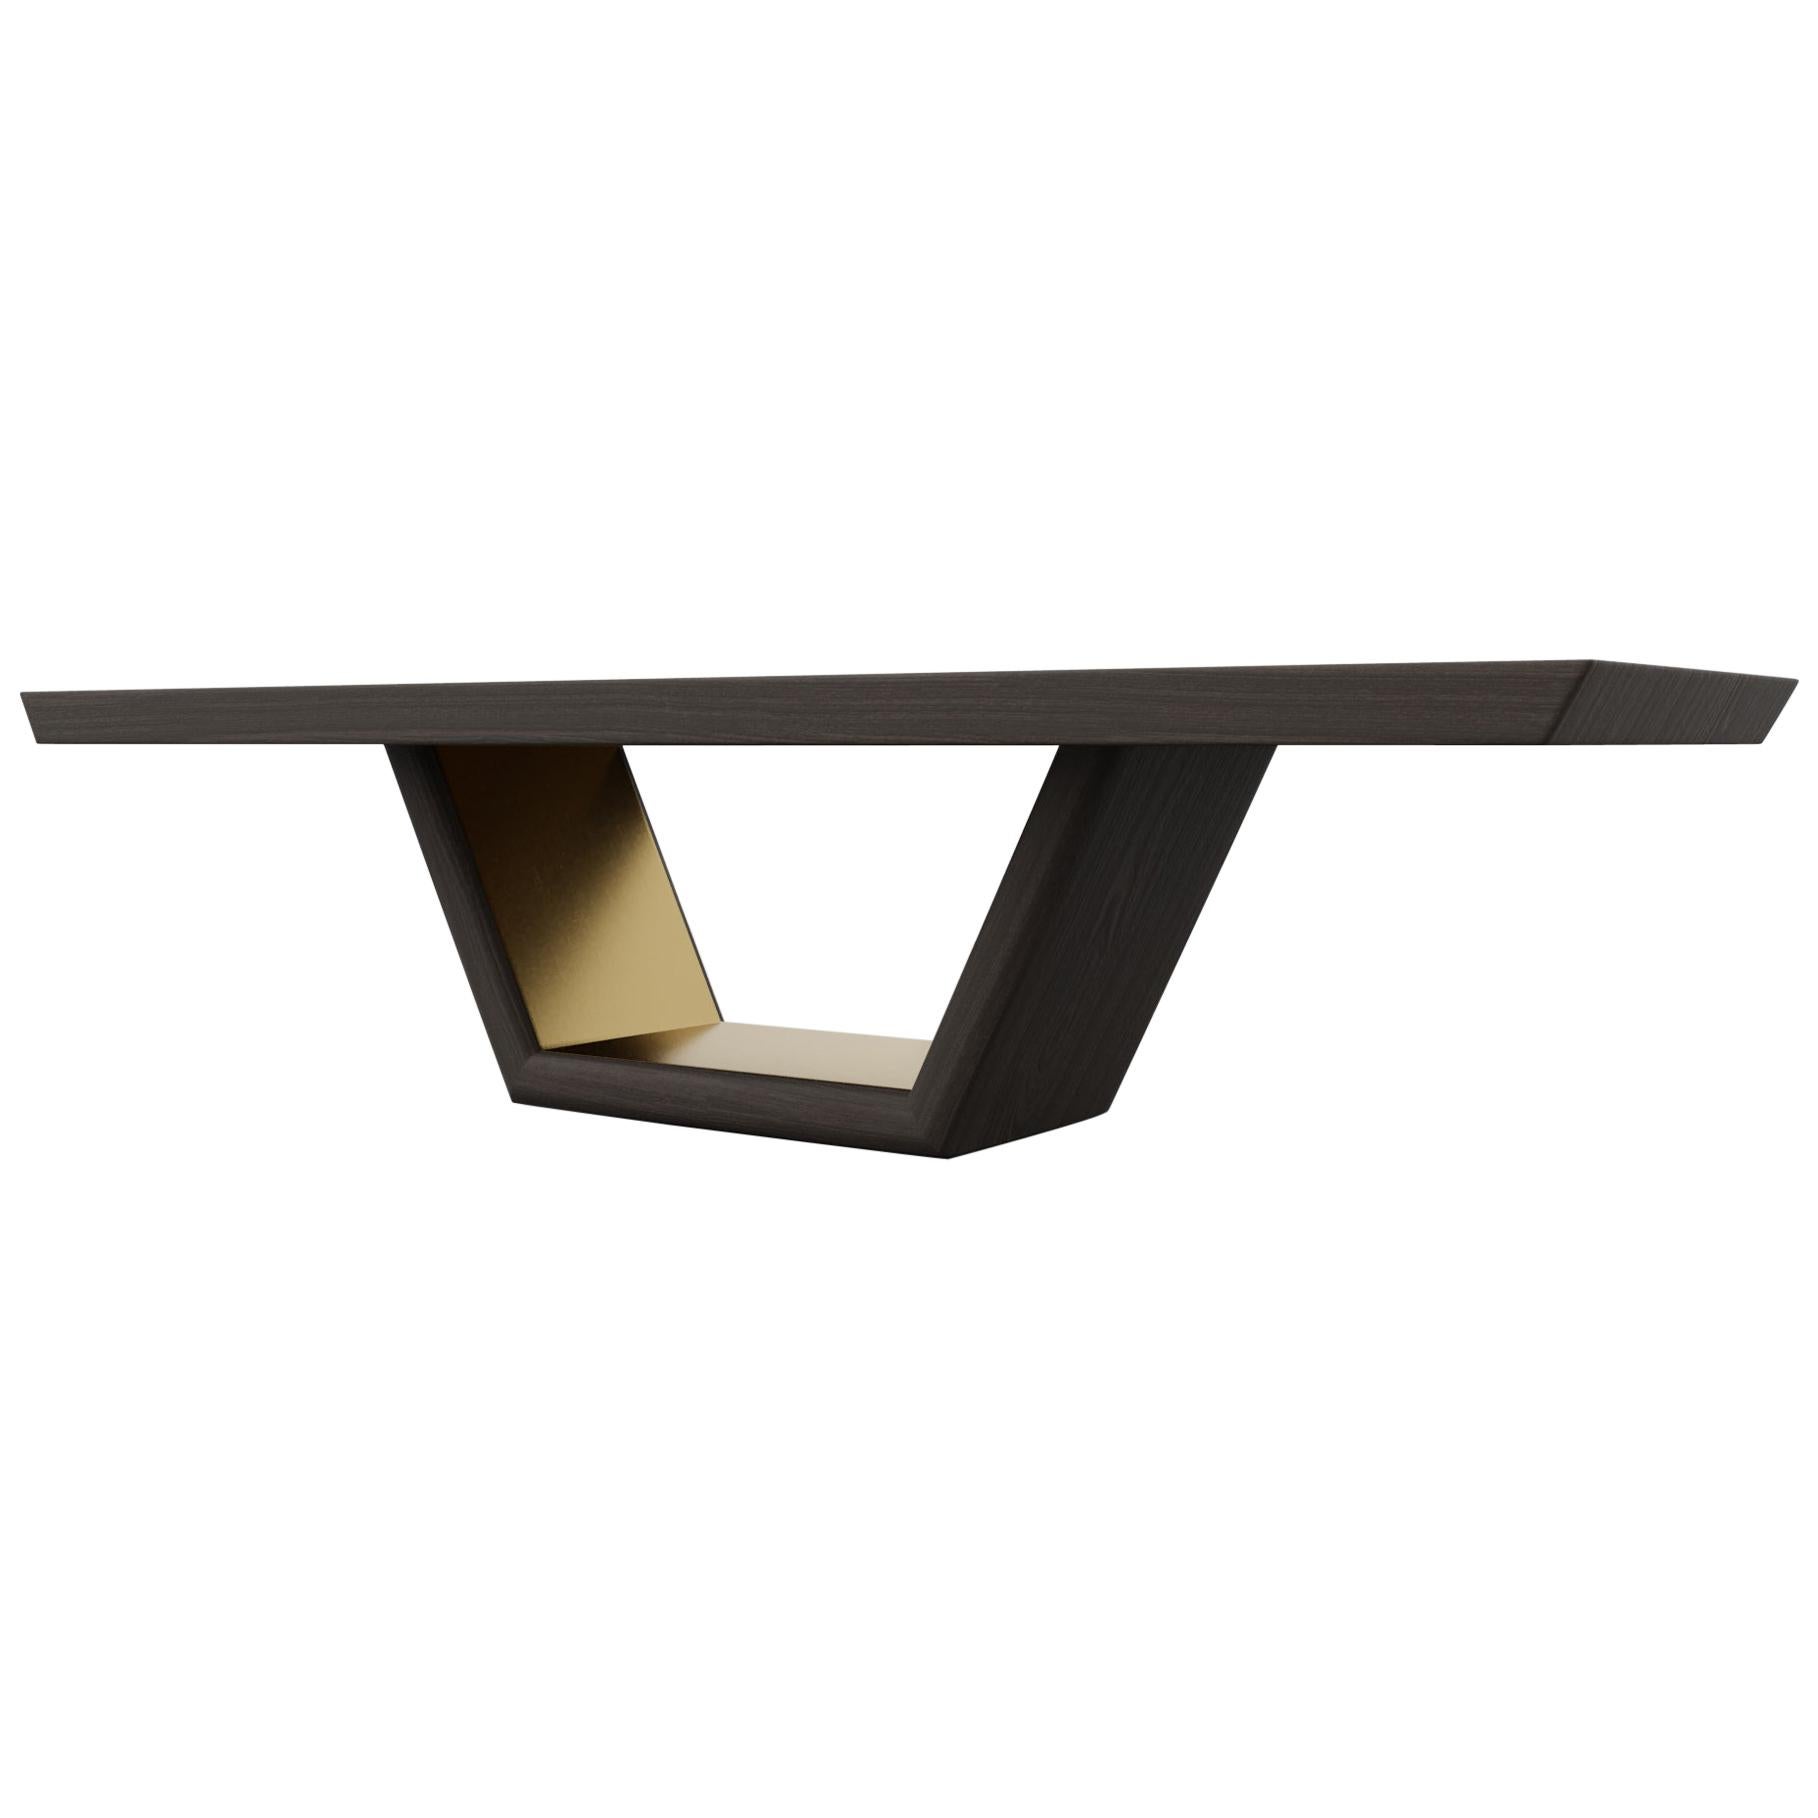 JOLIE DINING TABLE - Ebony Oak Dining Table with Metal Inlay